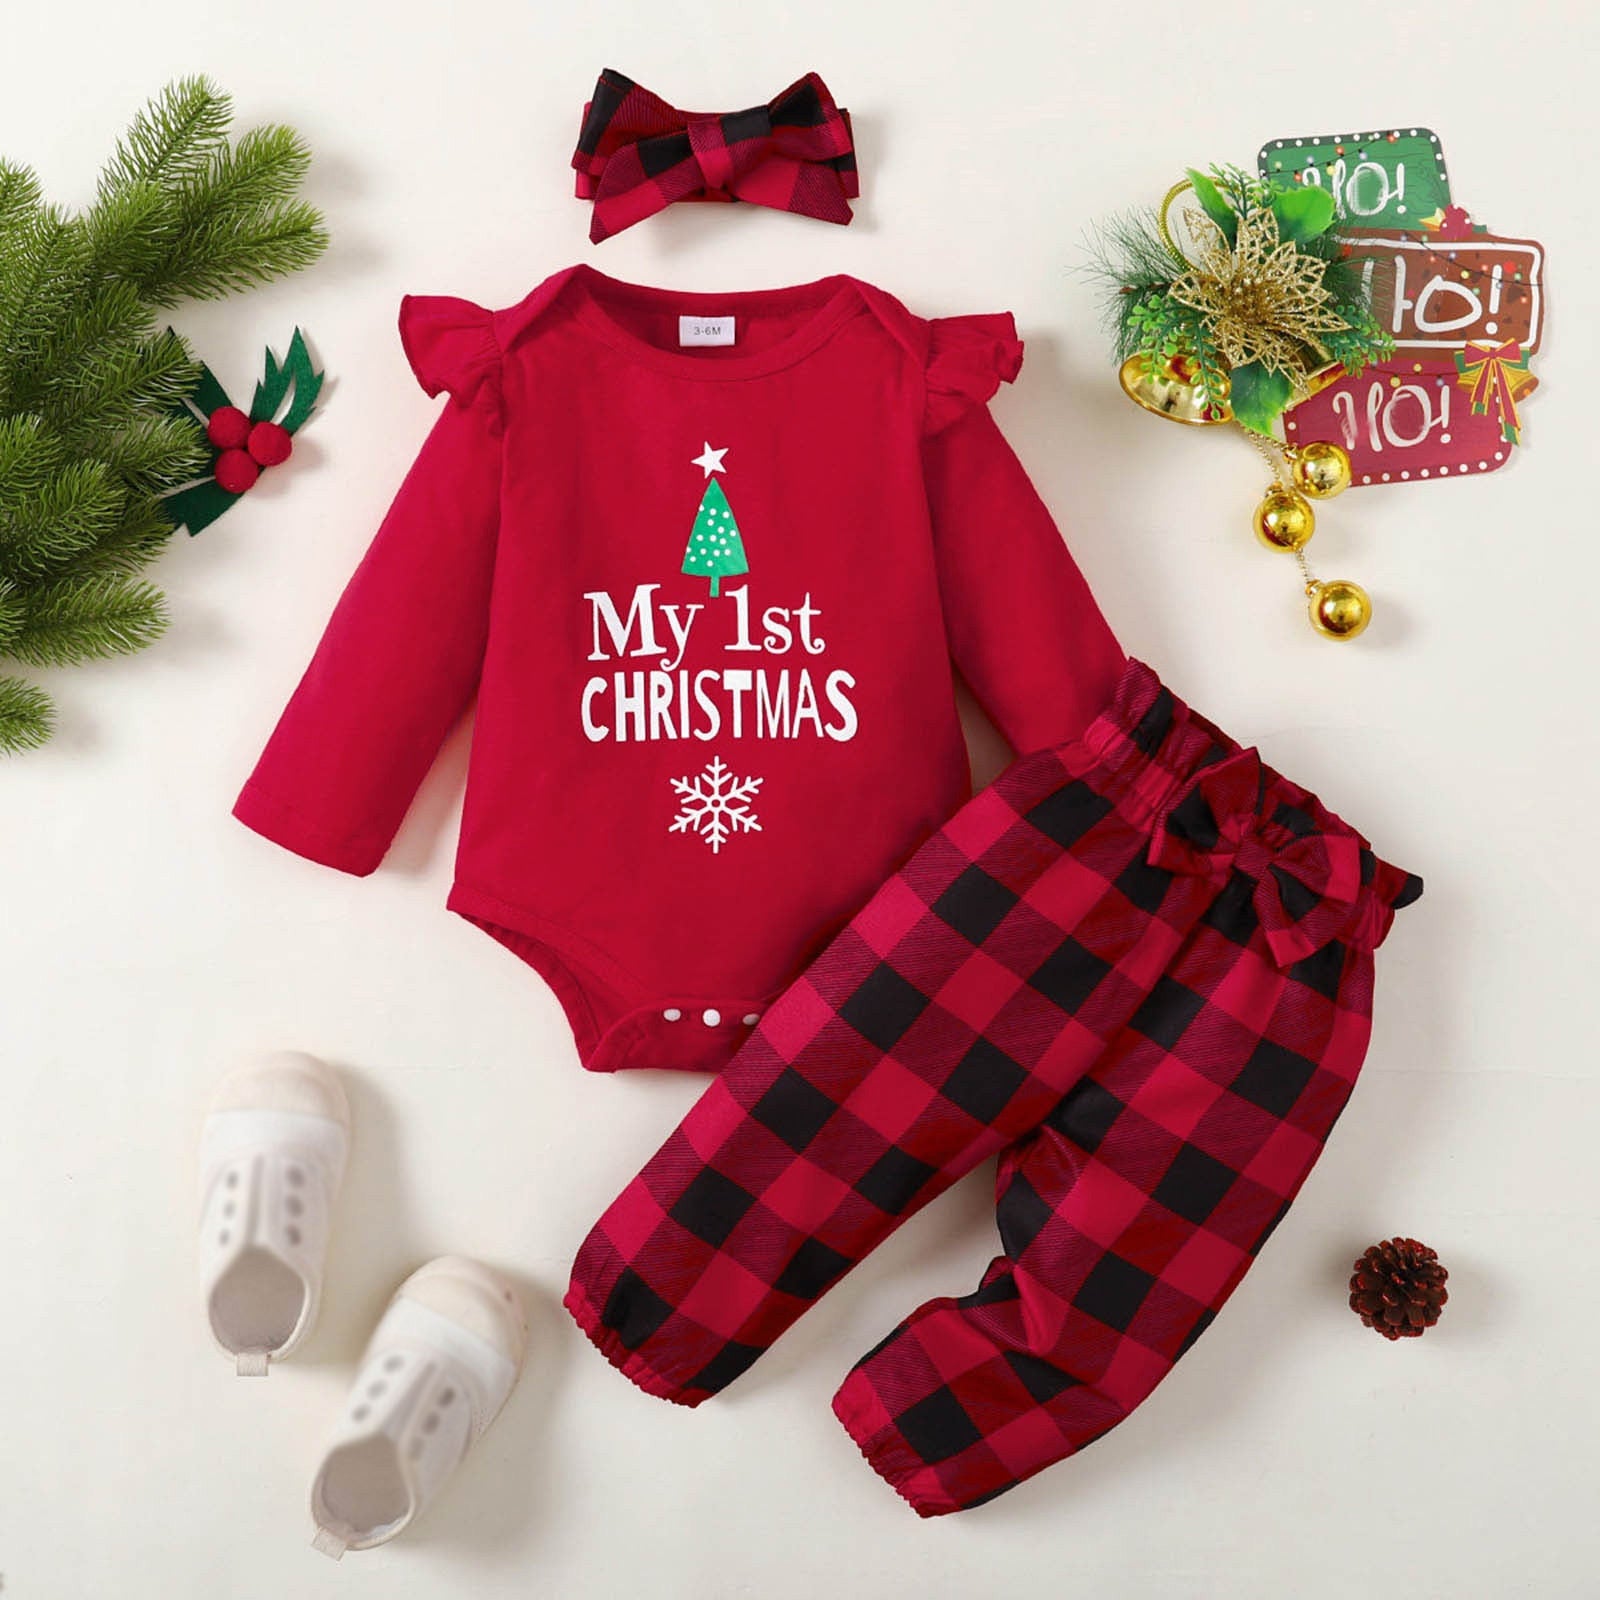 Adorable Christmas Outfits for Newborn Infant Girls - Long Sleeve Rompers, Pants, and Headbands Sets